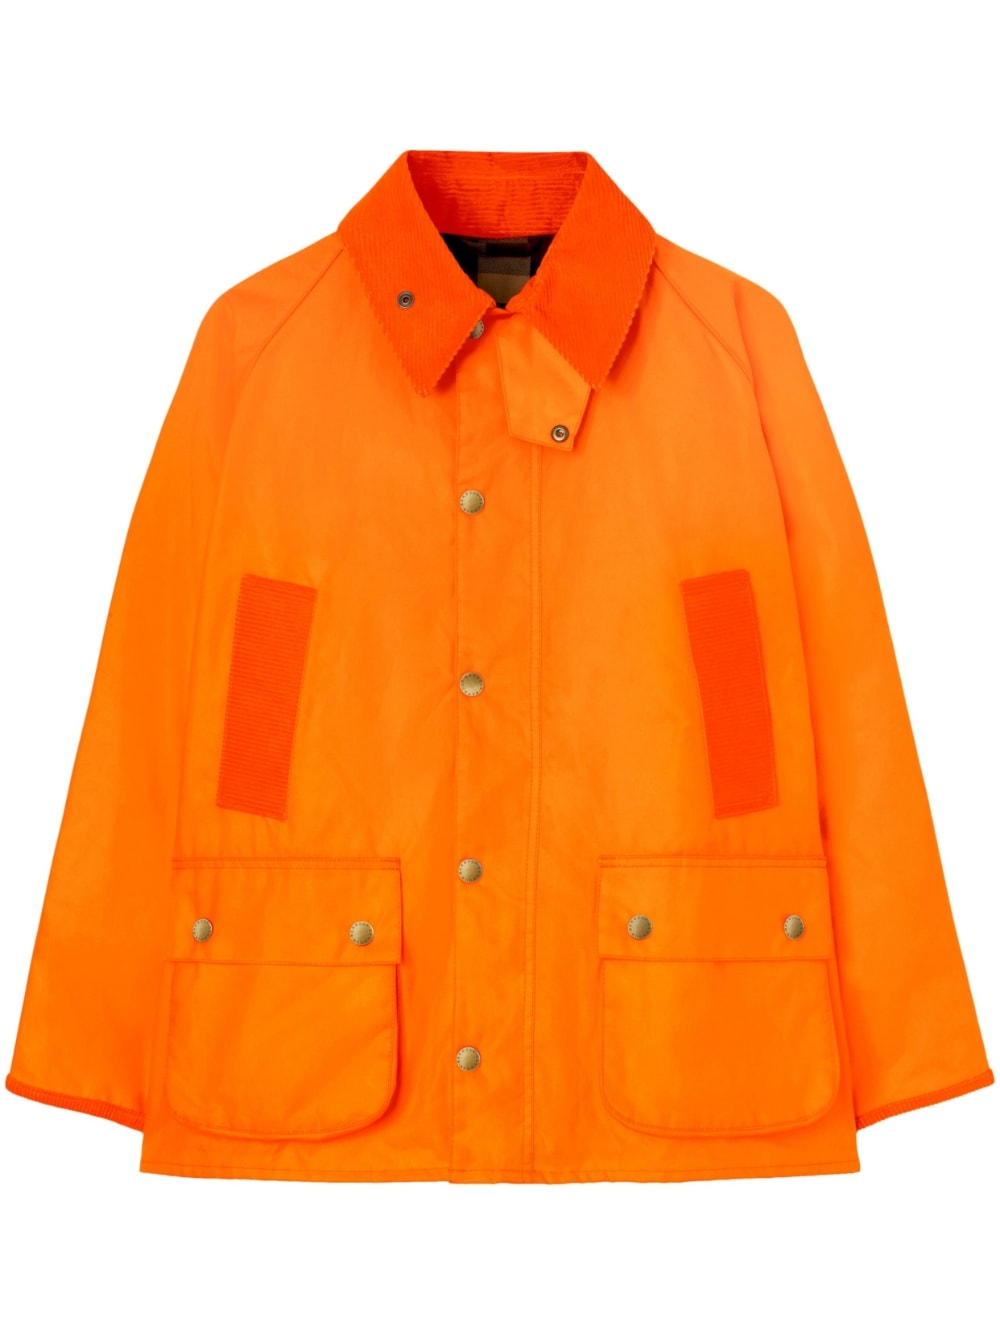 Palm Angels x Barbour Bedale waxed coat - Orange